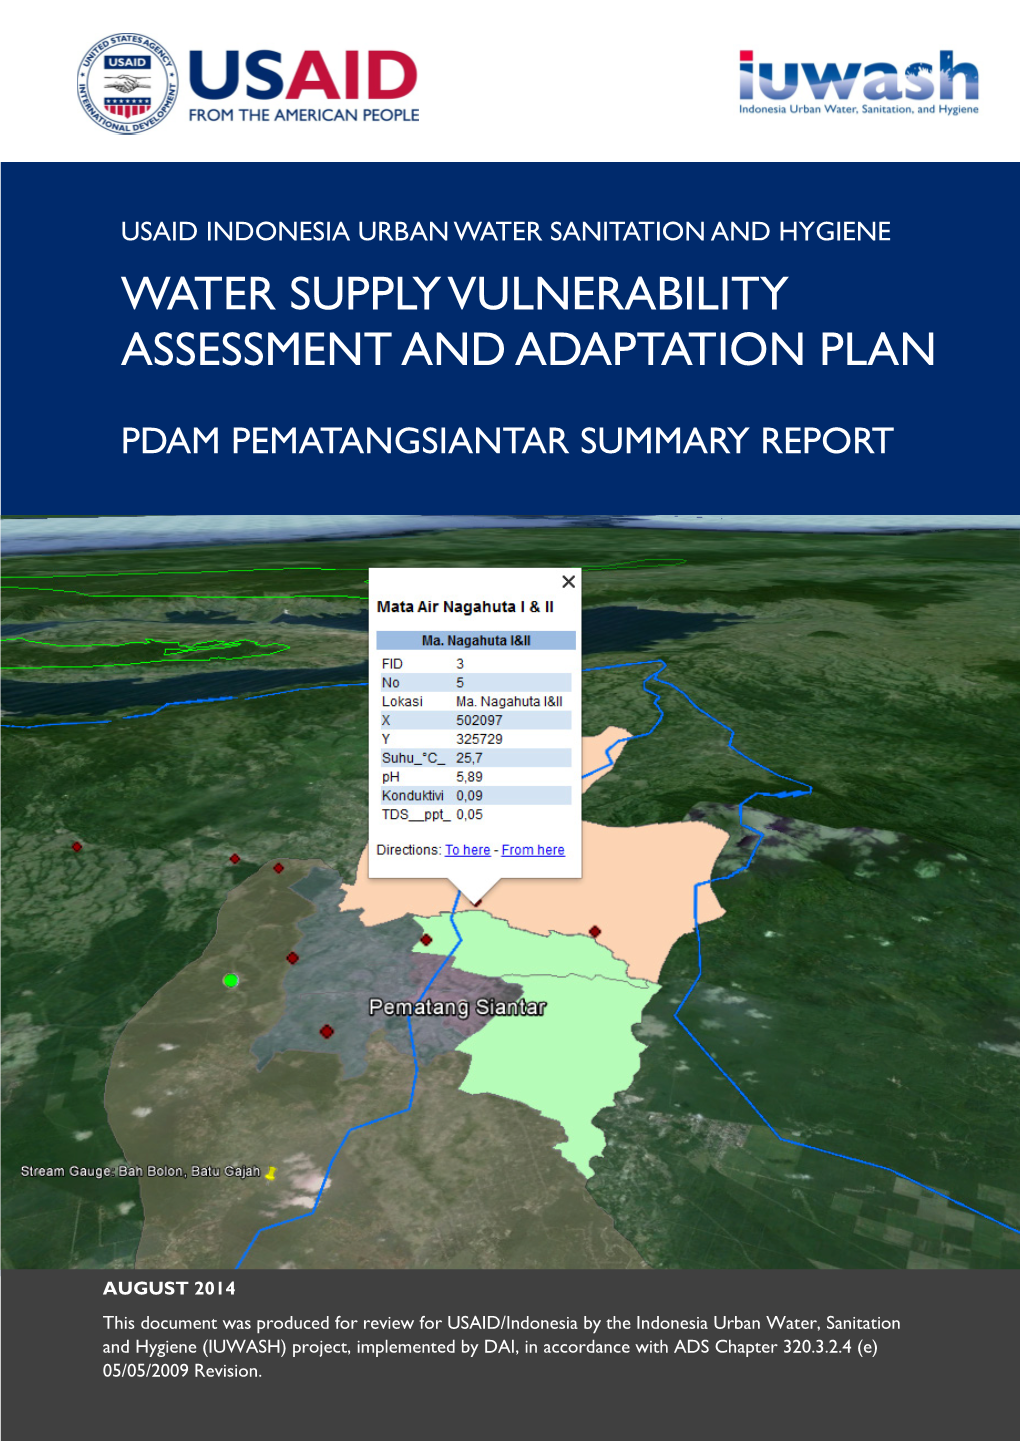 Water Supply Vulnerability Assessment and Adaptation Plan